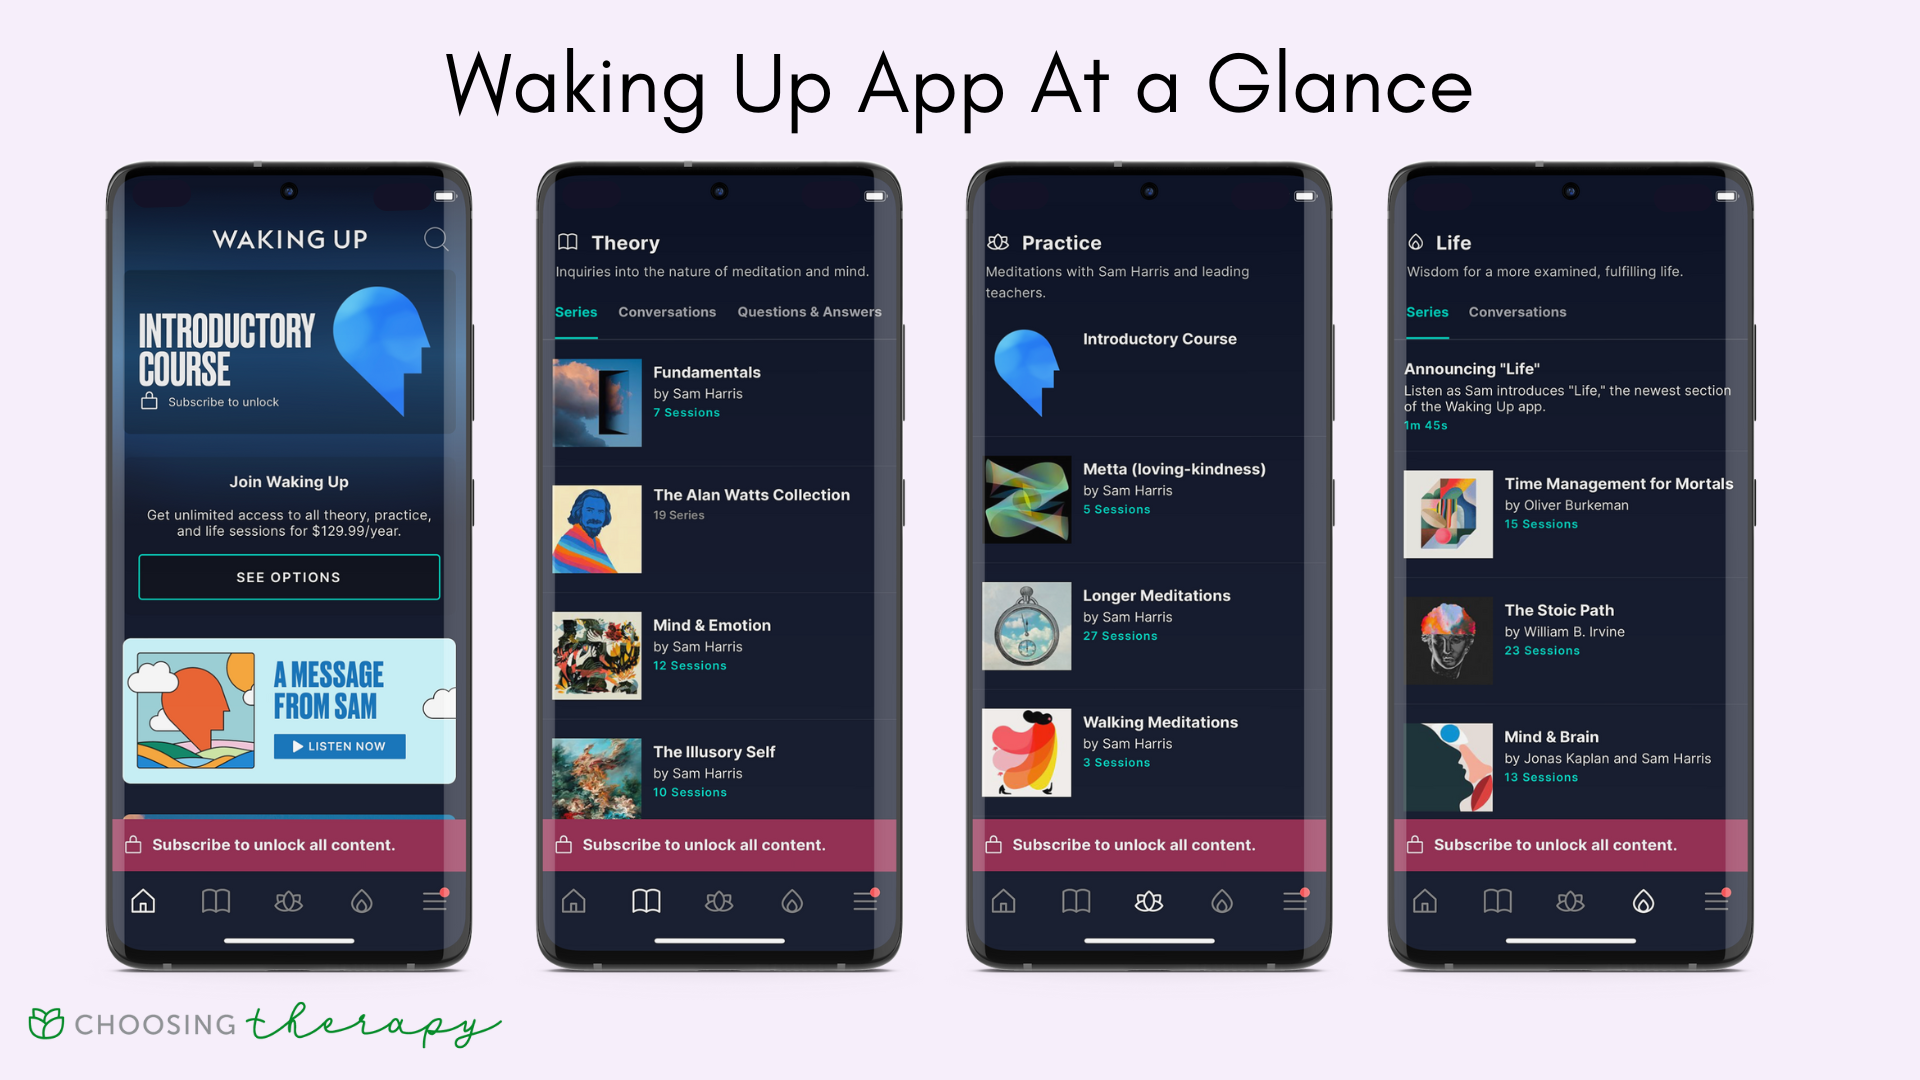 Waking Up App At a Glance - Image of the key features in the Waking Up app, the home screen, theory page, practice page, and life page